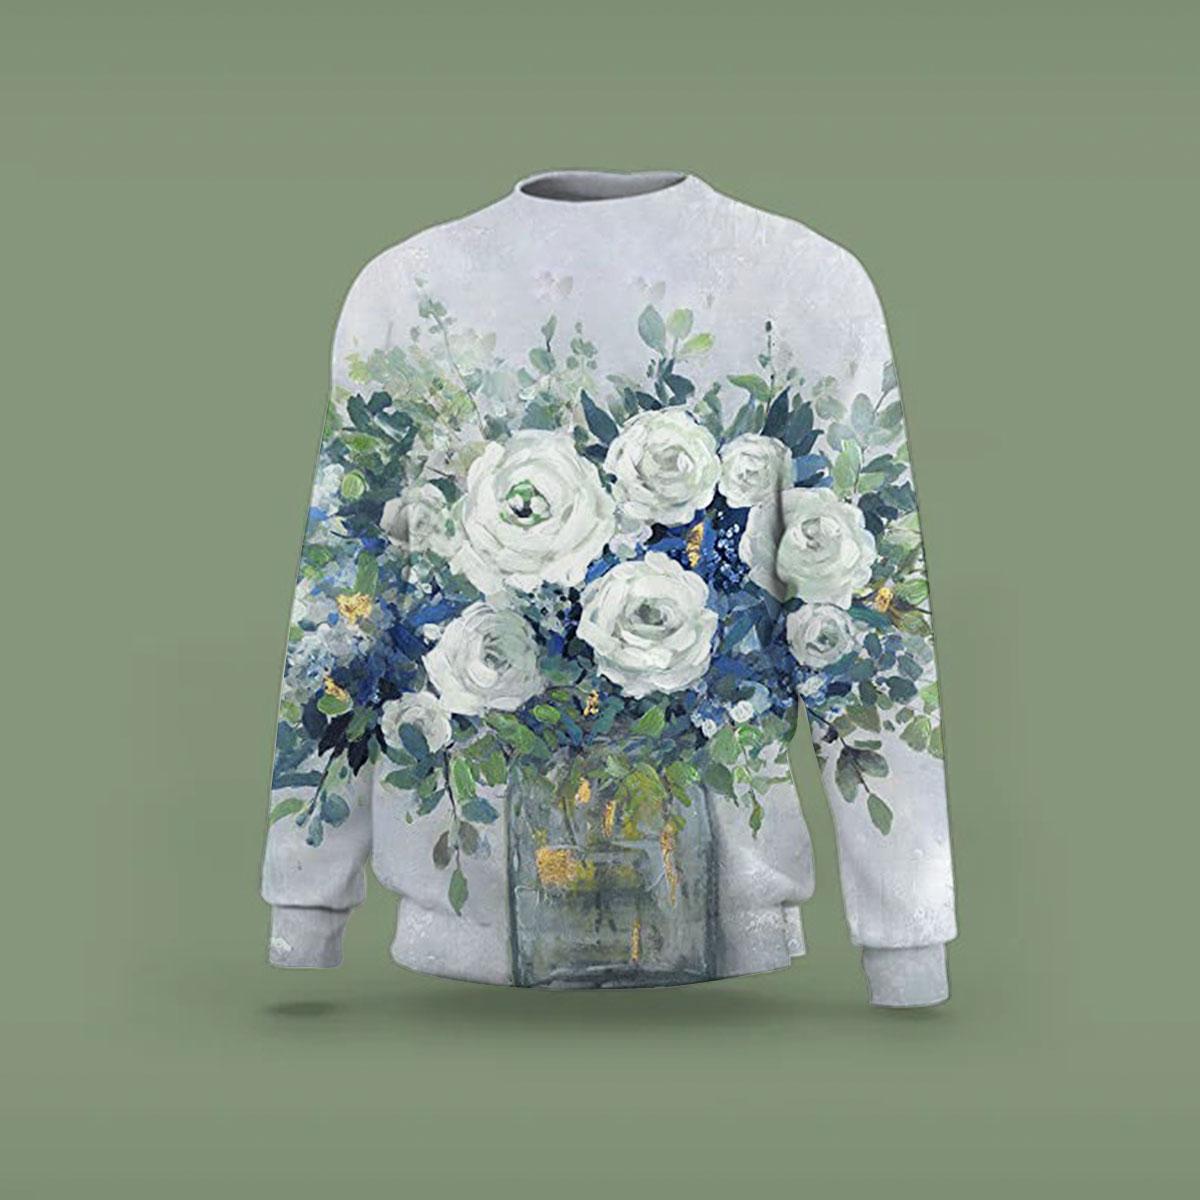 Blue And White Floral Sweatshirt